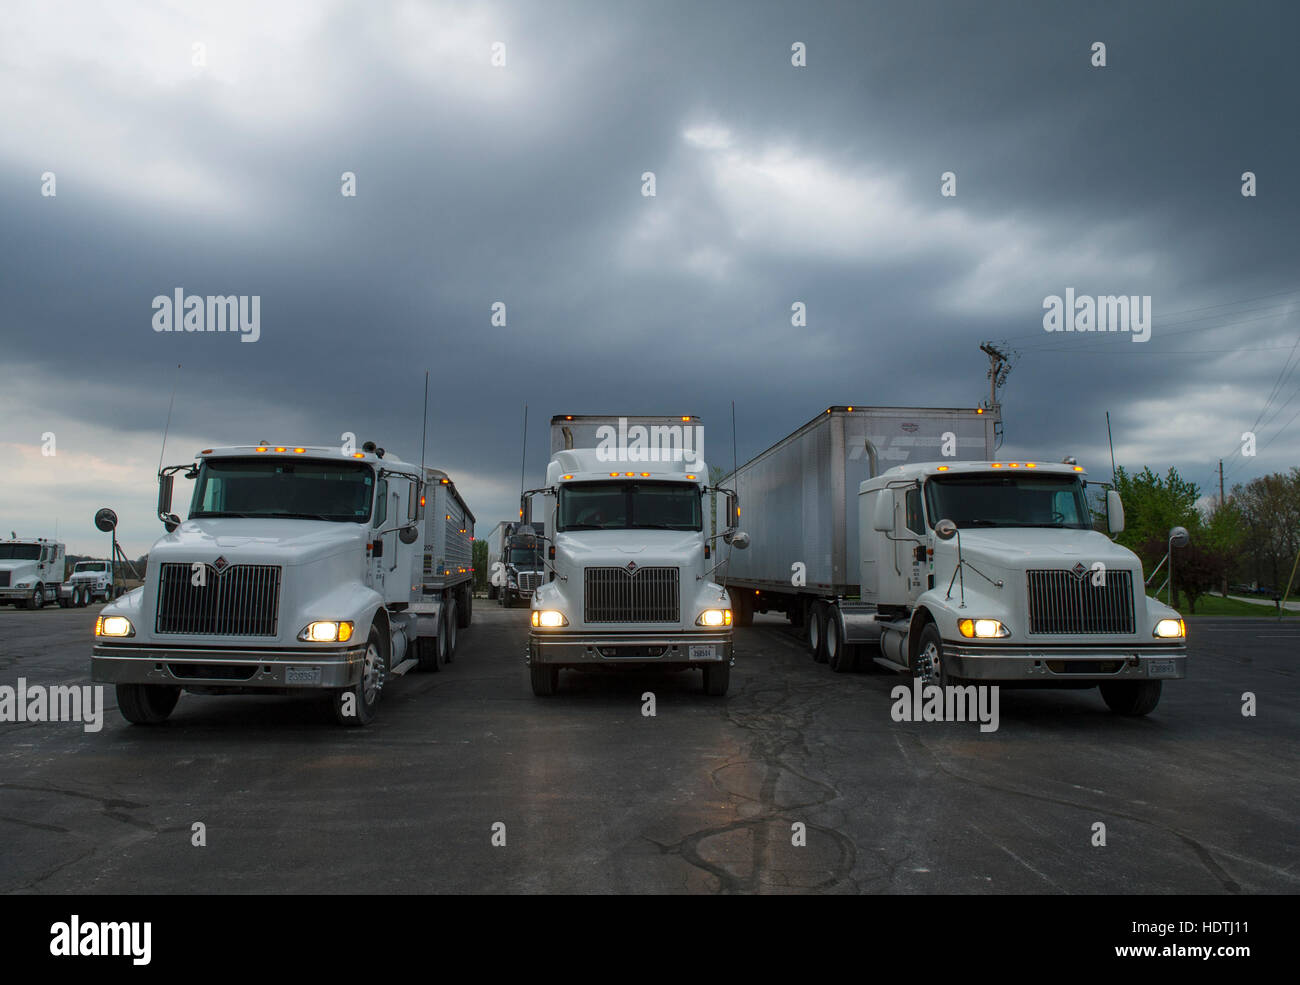 Three semi tractor-trailer trucks idling in a parking lot on a storm threatening evening. Stock Photo